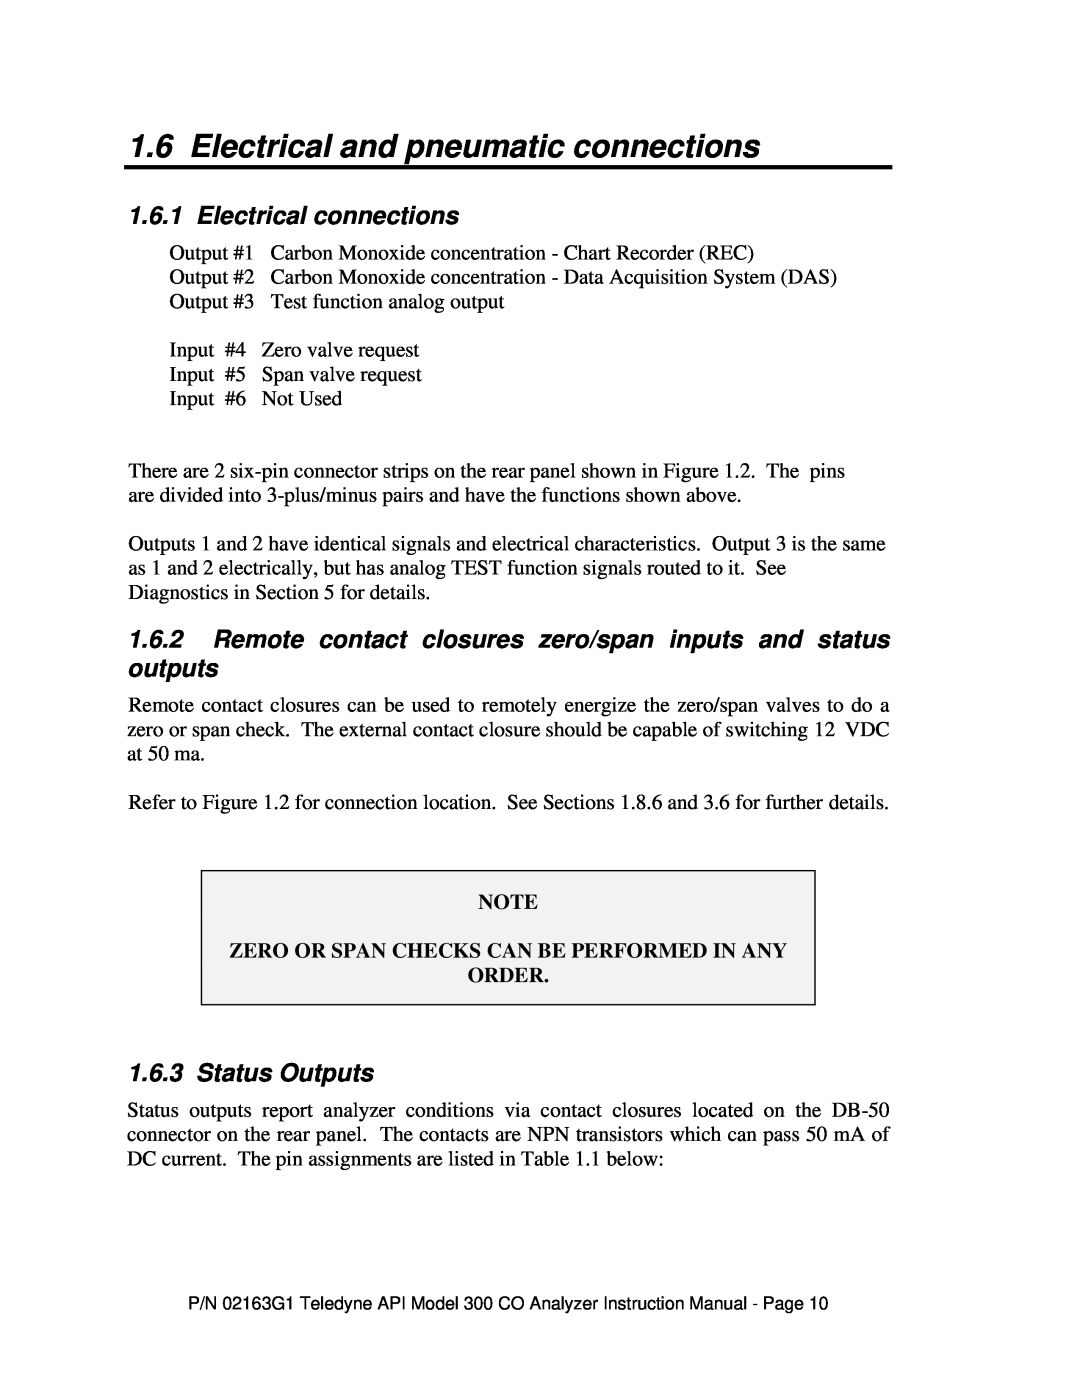 Teledyne 300 instruction manual Electrical and pneumatic connections, Electrical connections, Status Outputs 